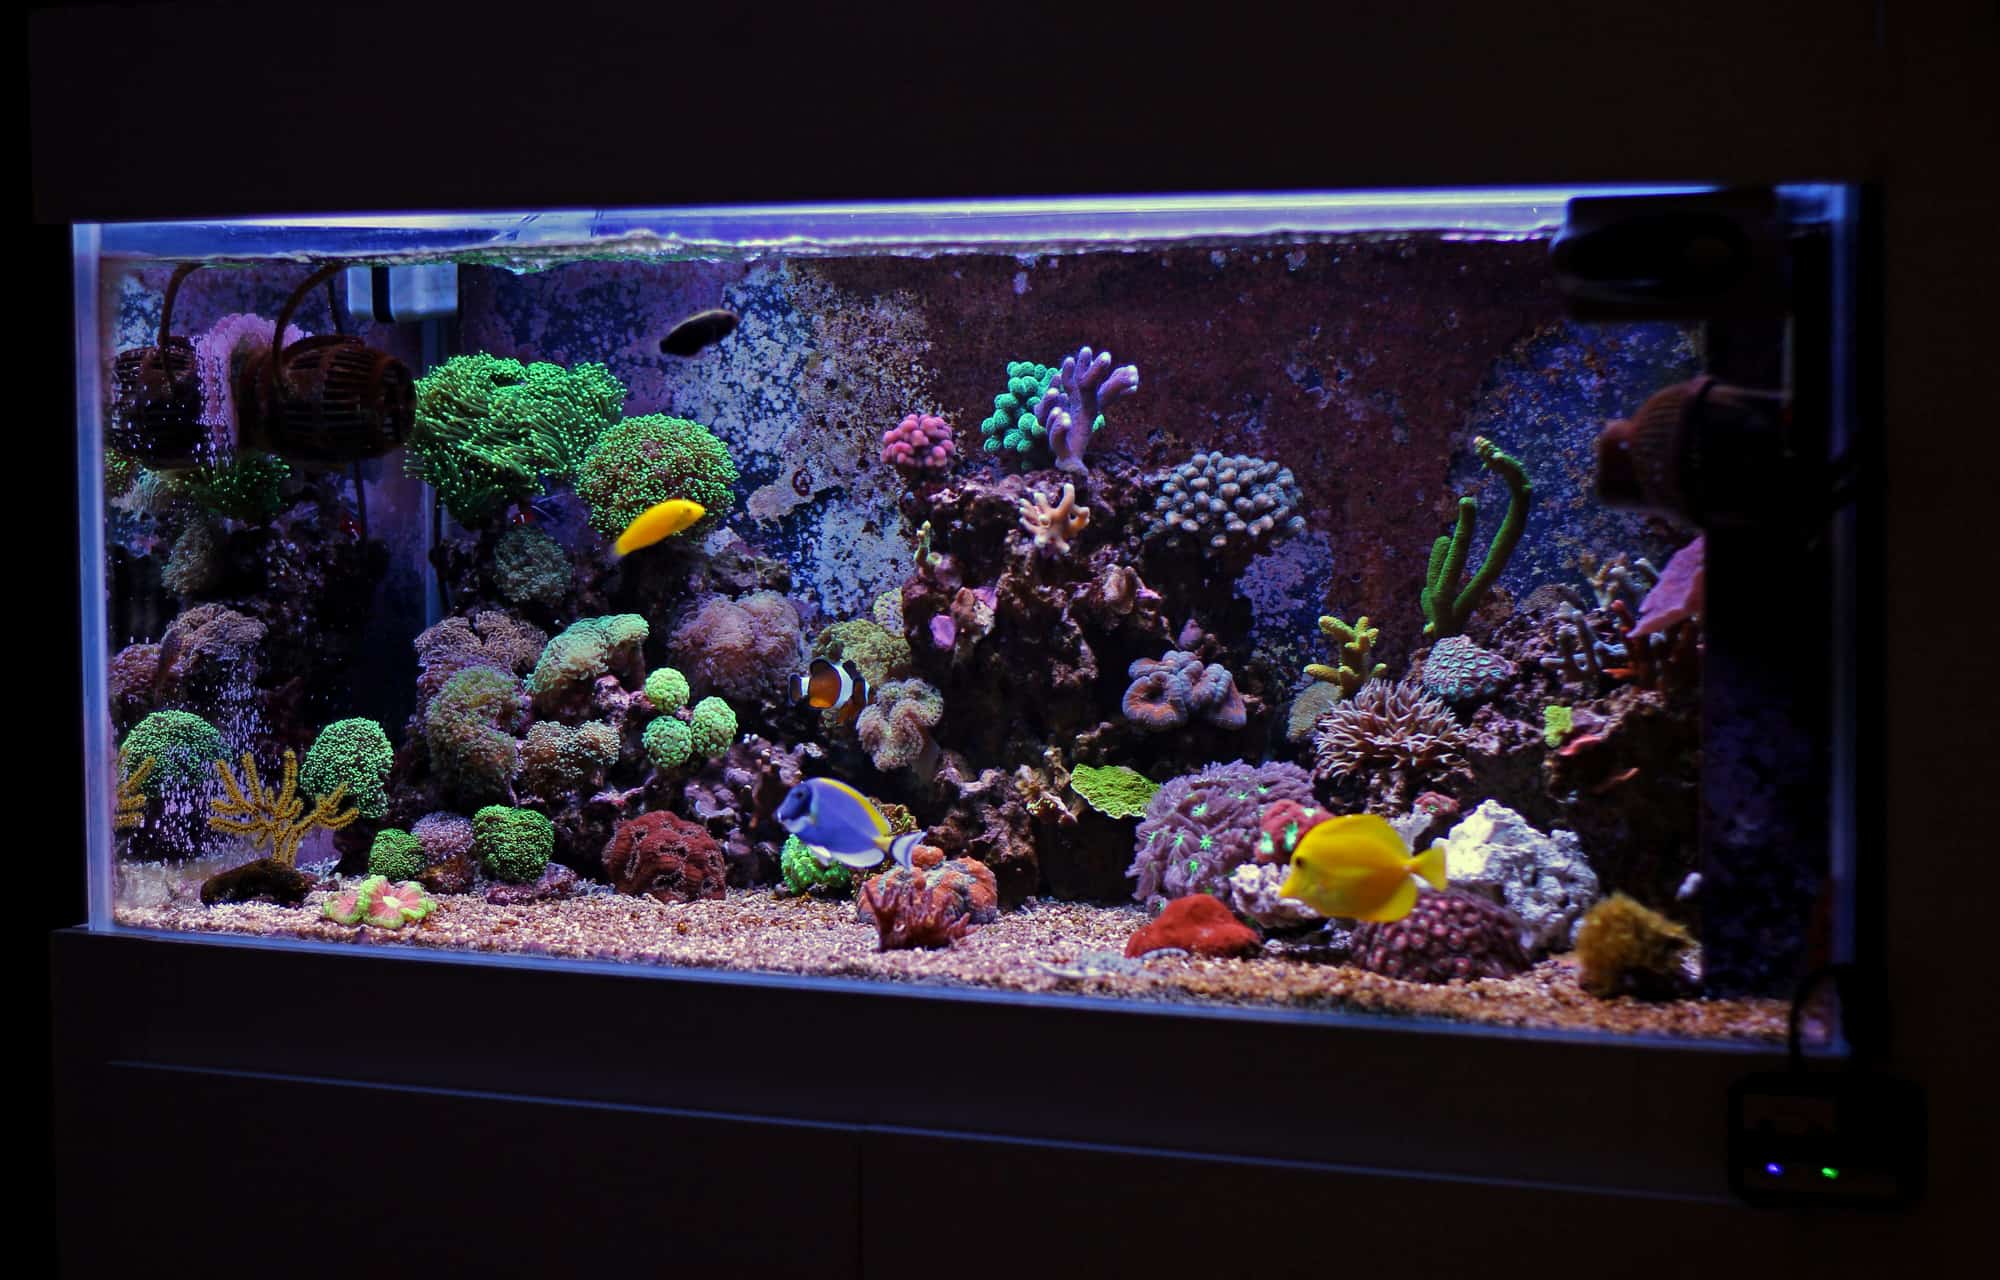 Things to Stop Doing If You Have a Saltwater Aquarium